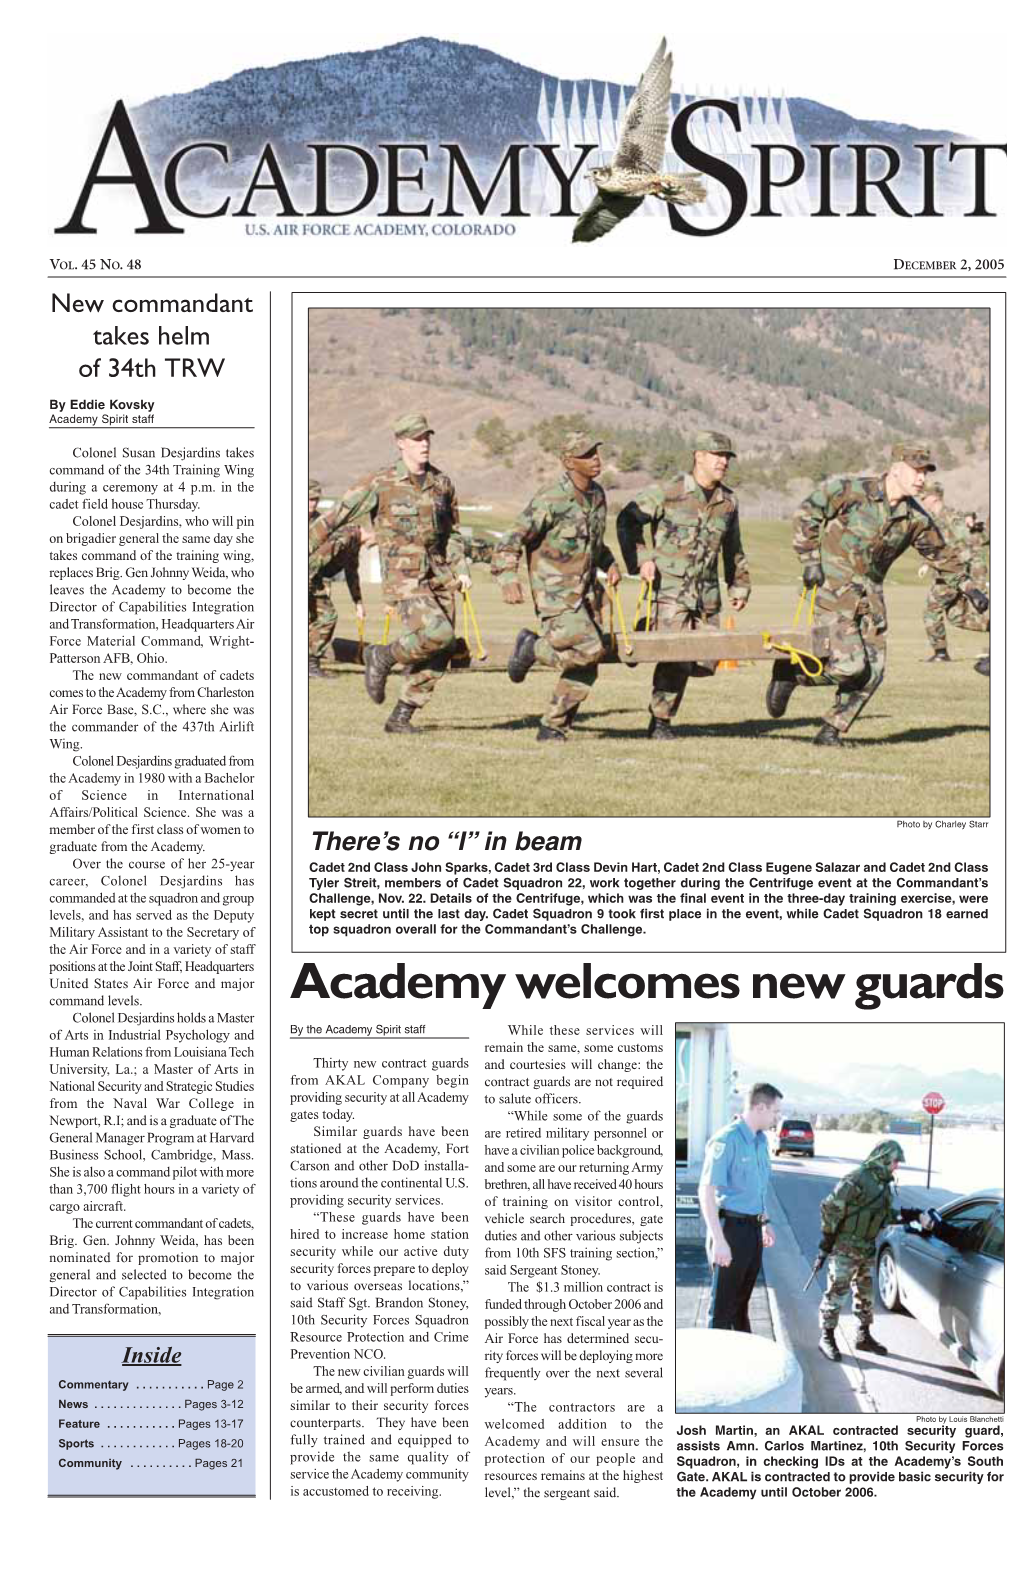 Academy Welcomes New Guards